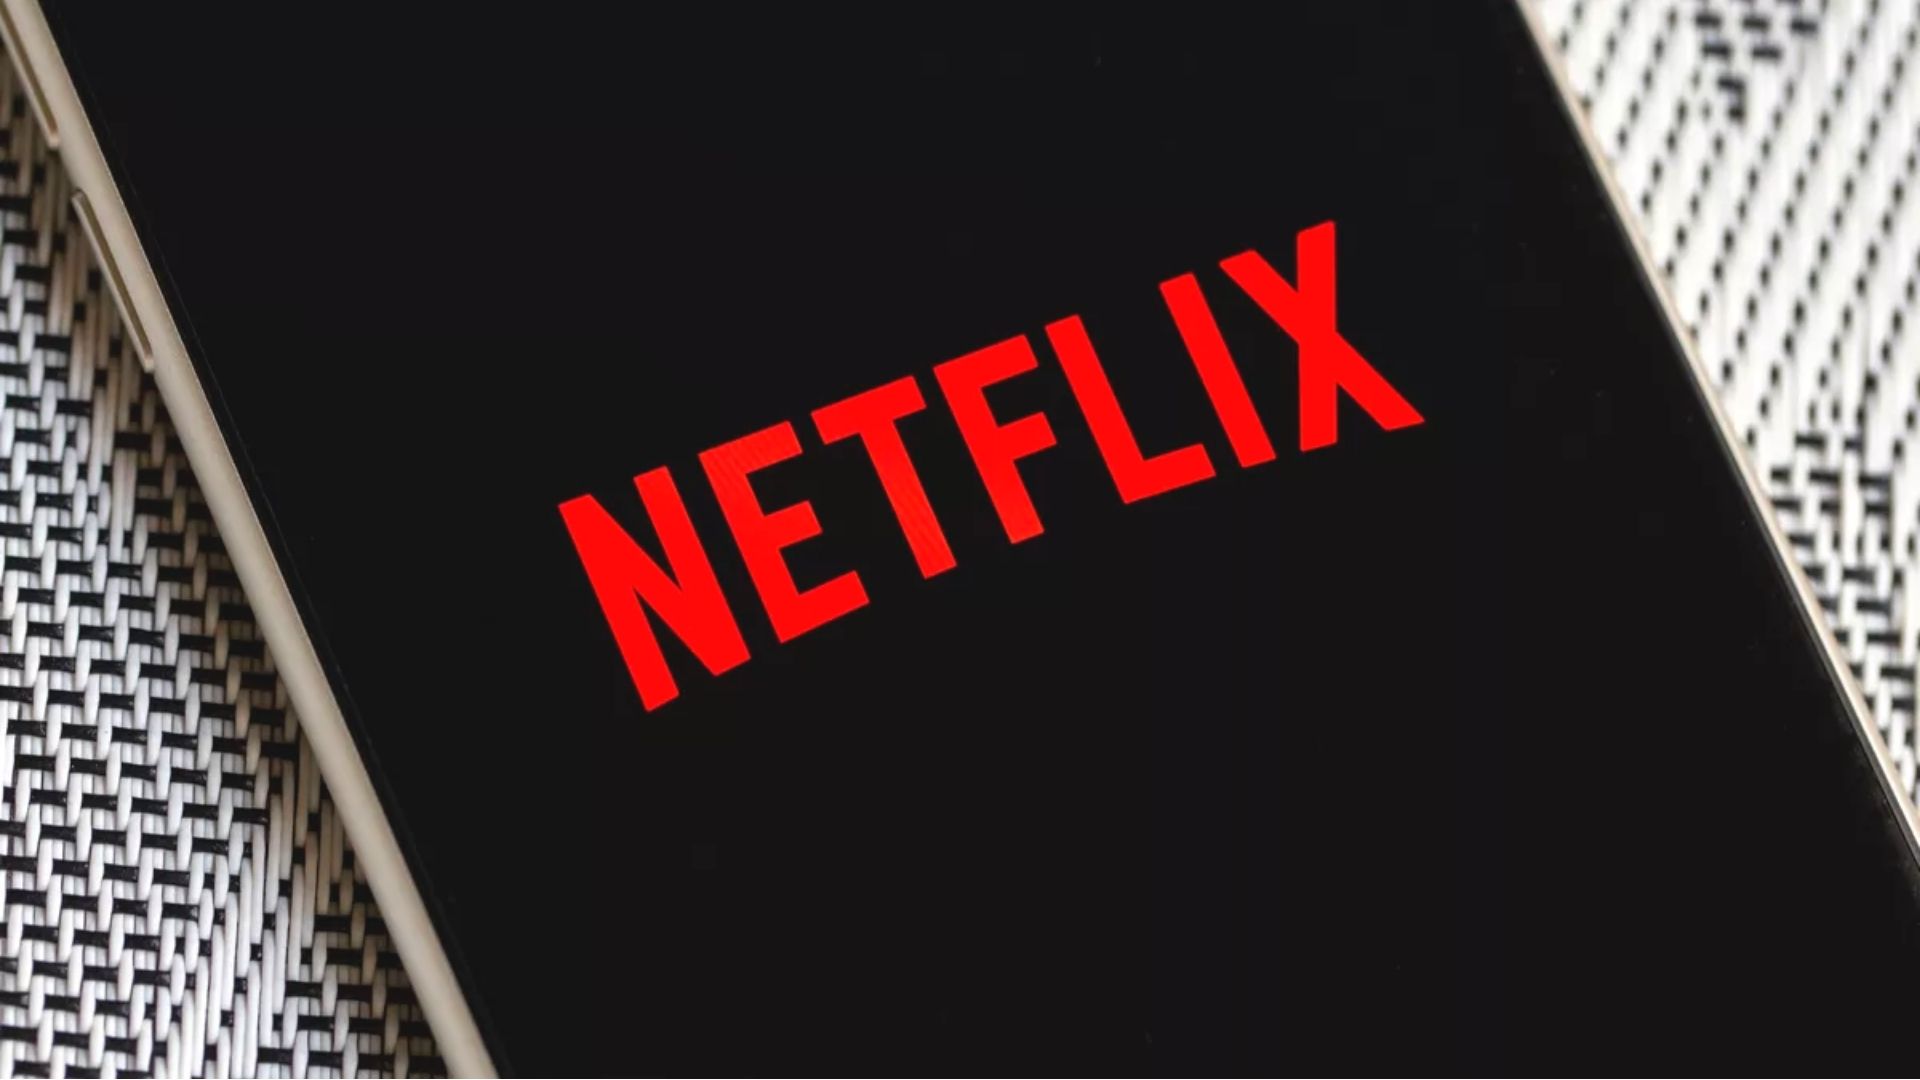 Netflix’s Gaming Plans Seem To Include Original Games & Mobile Titles